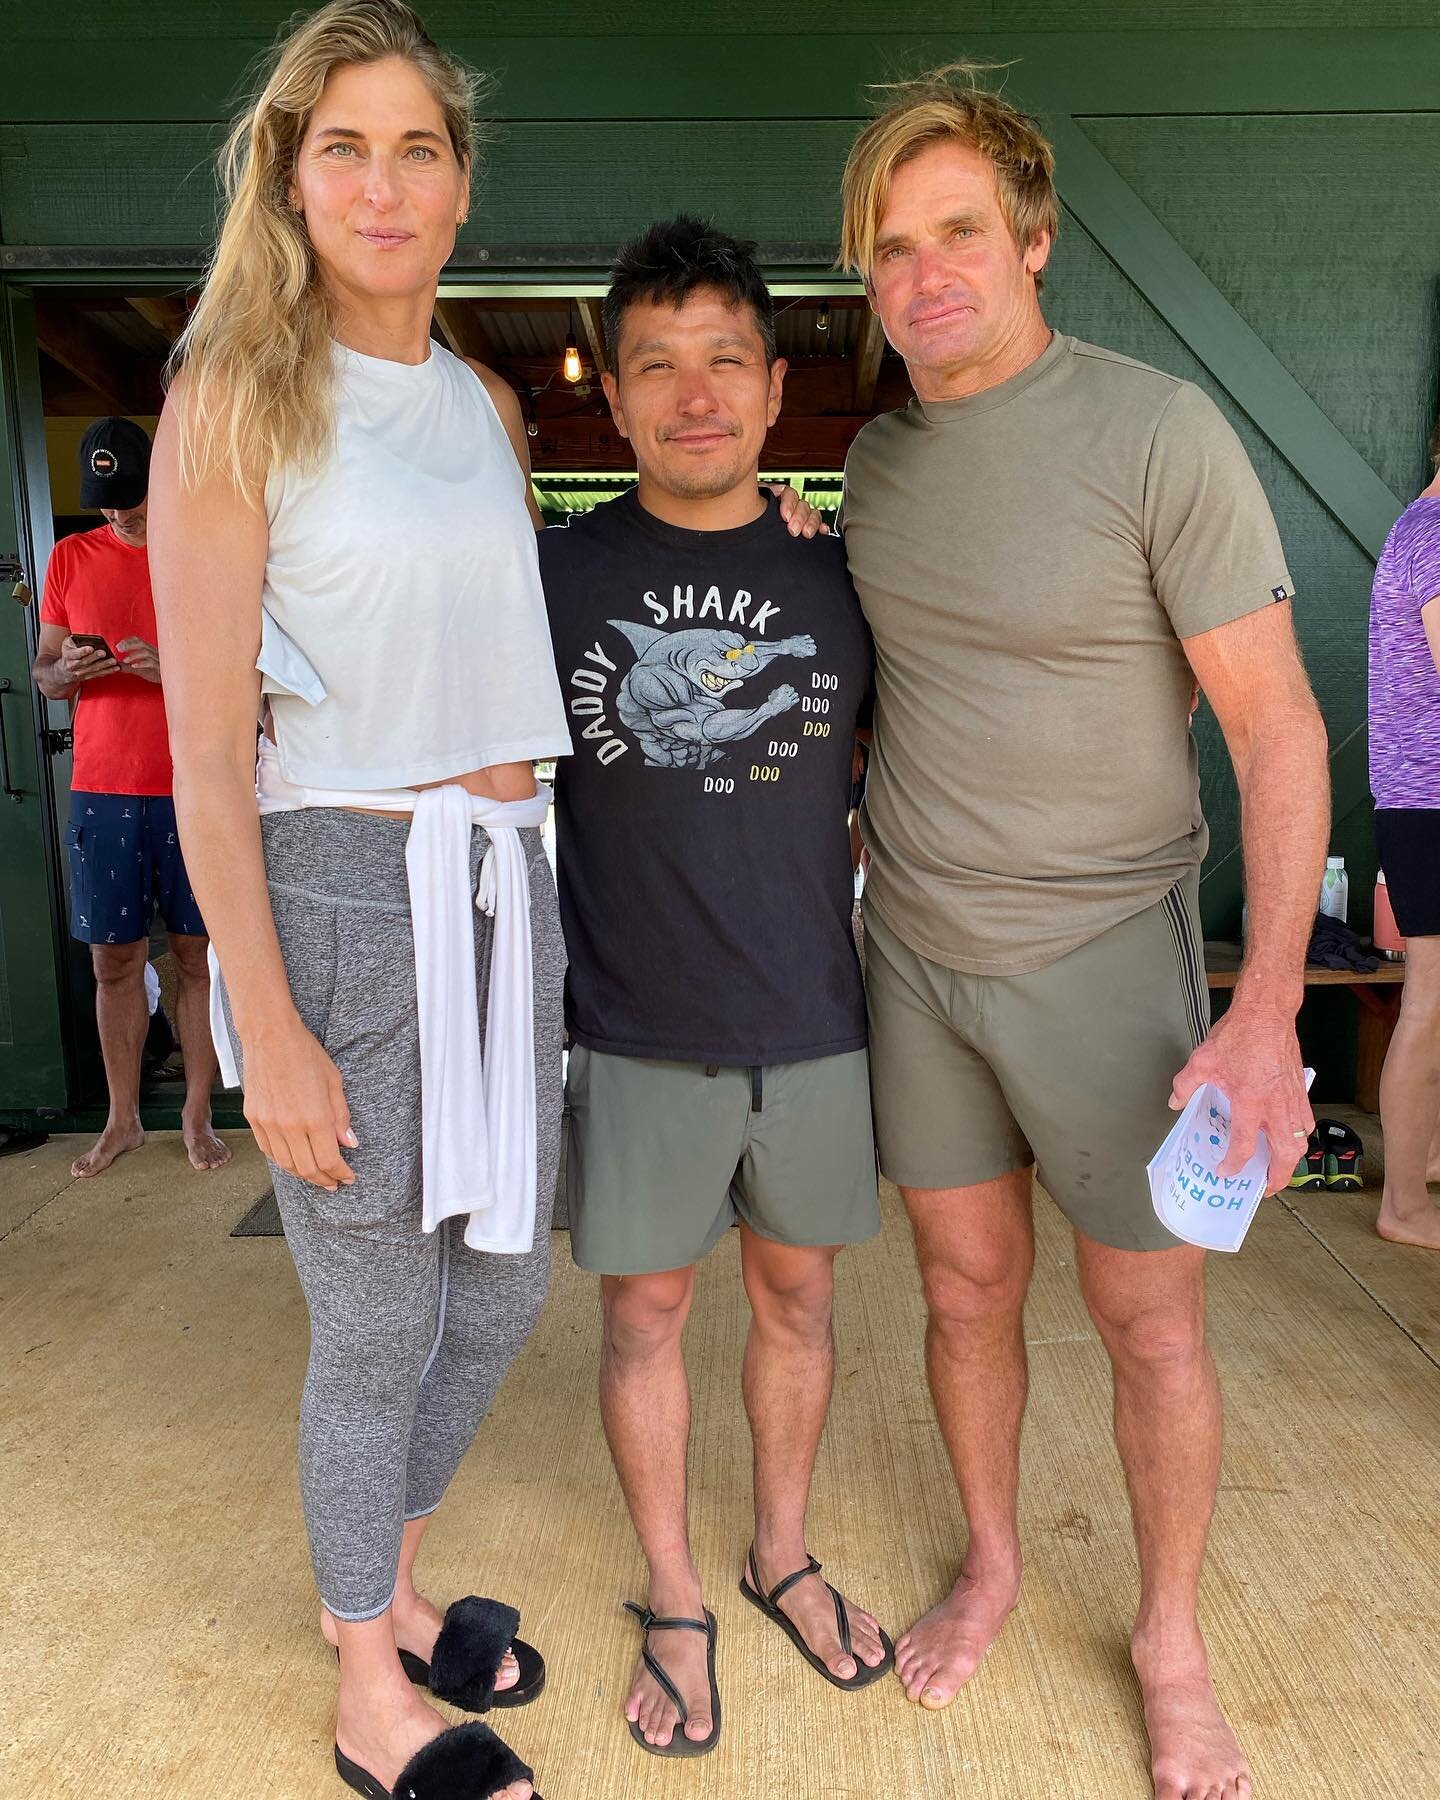 Throwback Thursday! Last week I had the opportunity to attend @xptlife experience I Kauai hosted by @gabbyreece @lairdhamilton and the whole XPT Experience Team. This was the best vacation, best fitness training and completely out of my comfort zone.